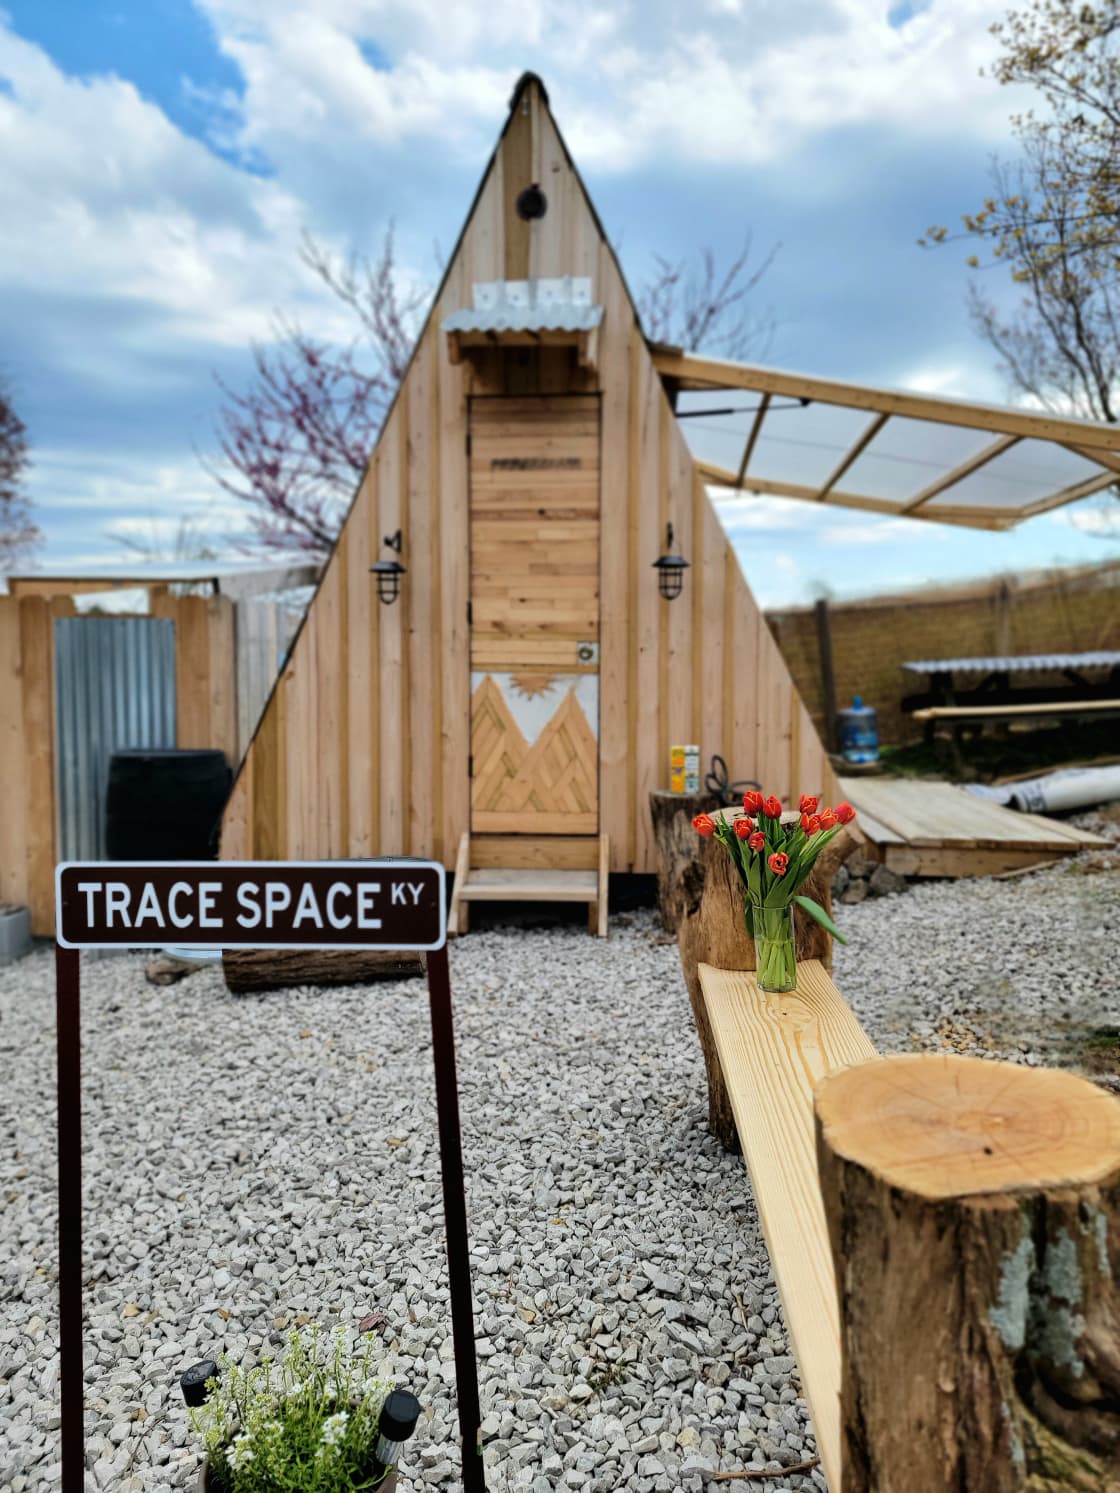 Trace Space KY